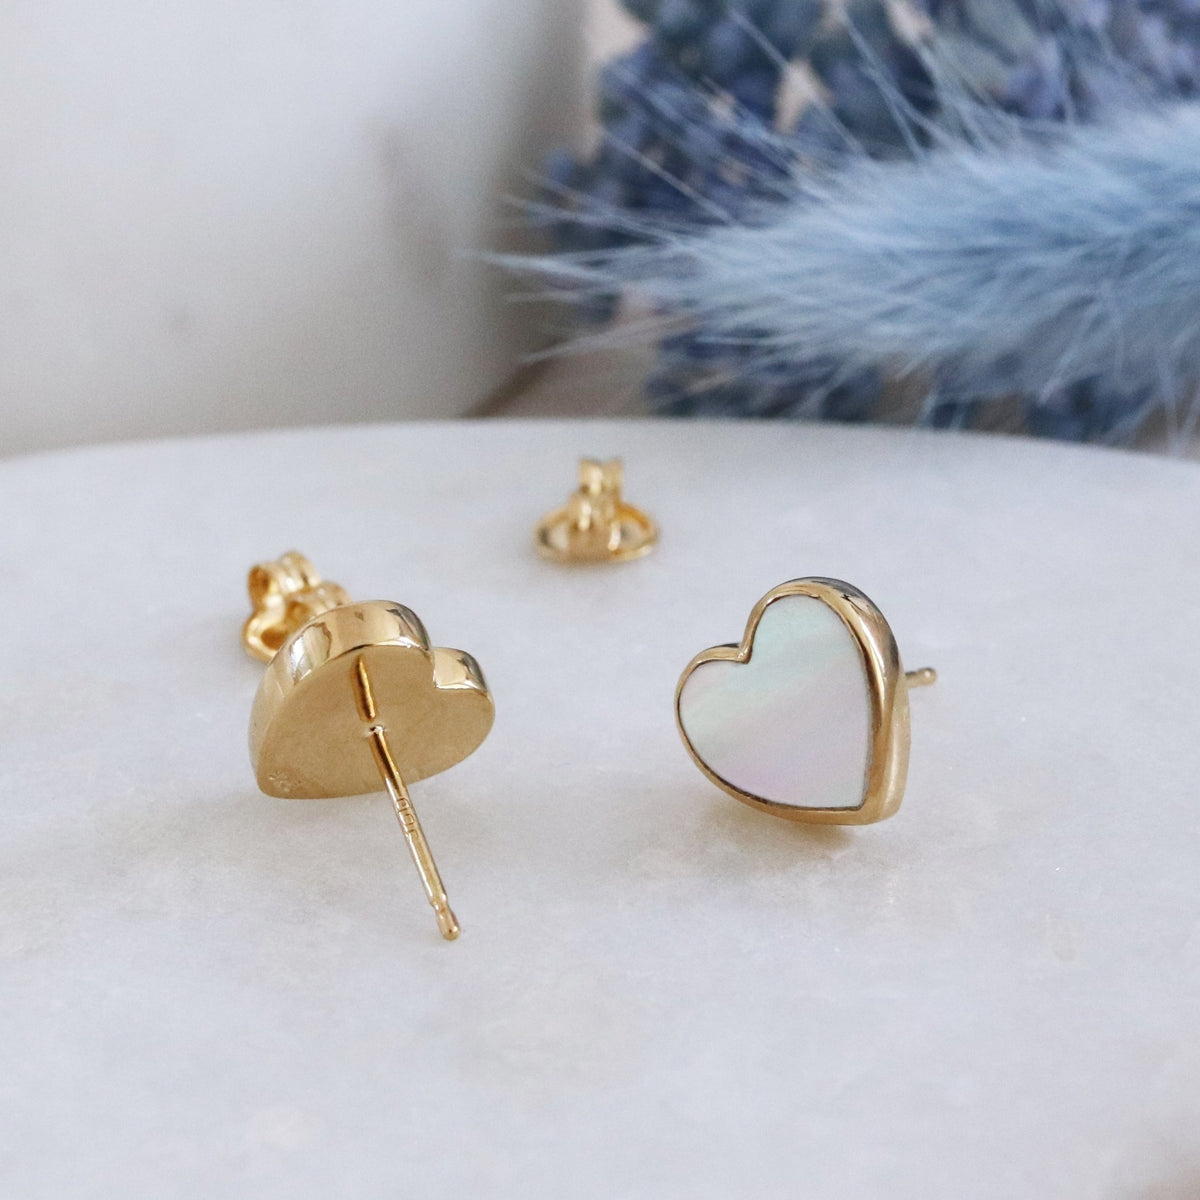 FRAICHE INSPIRE SWEETHEART STUDS - MOTHER OF PEARL &amp; GOLD - SO PRETTY CARA COTTER